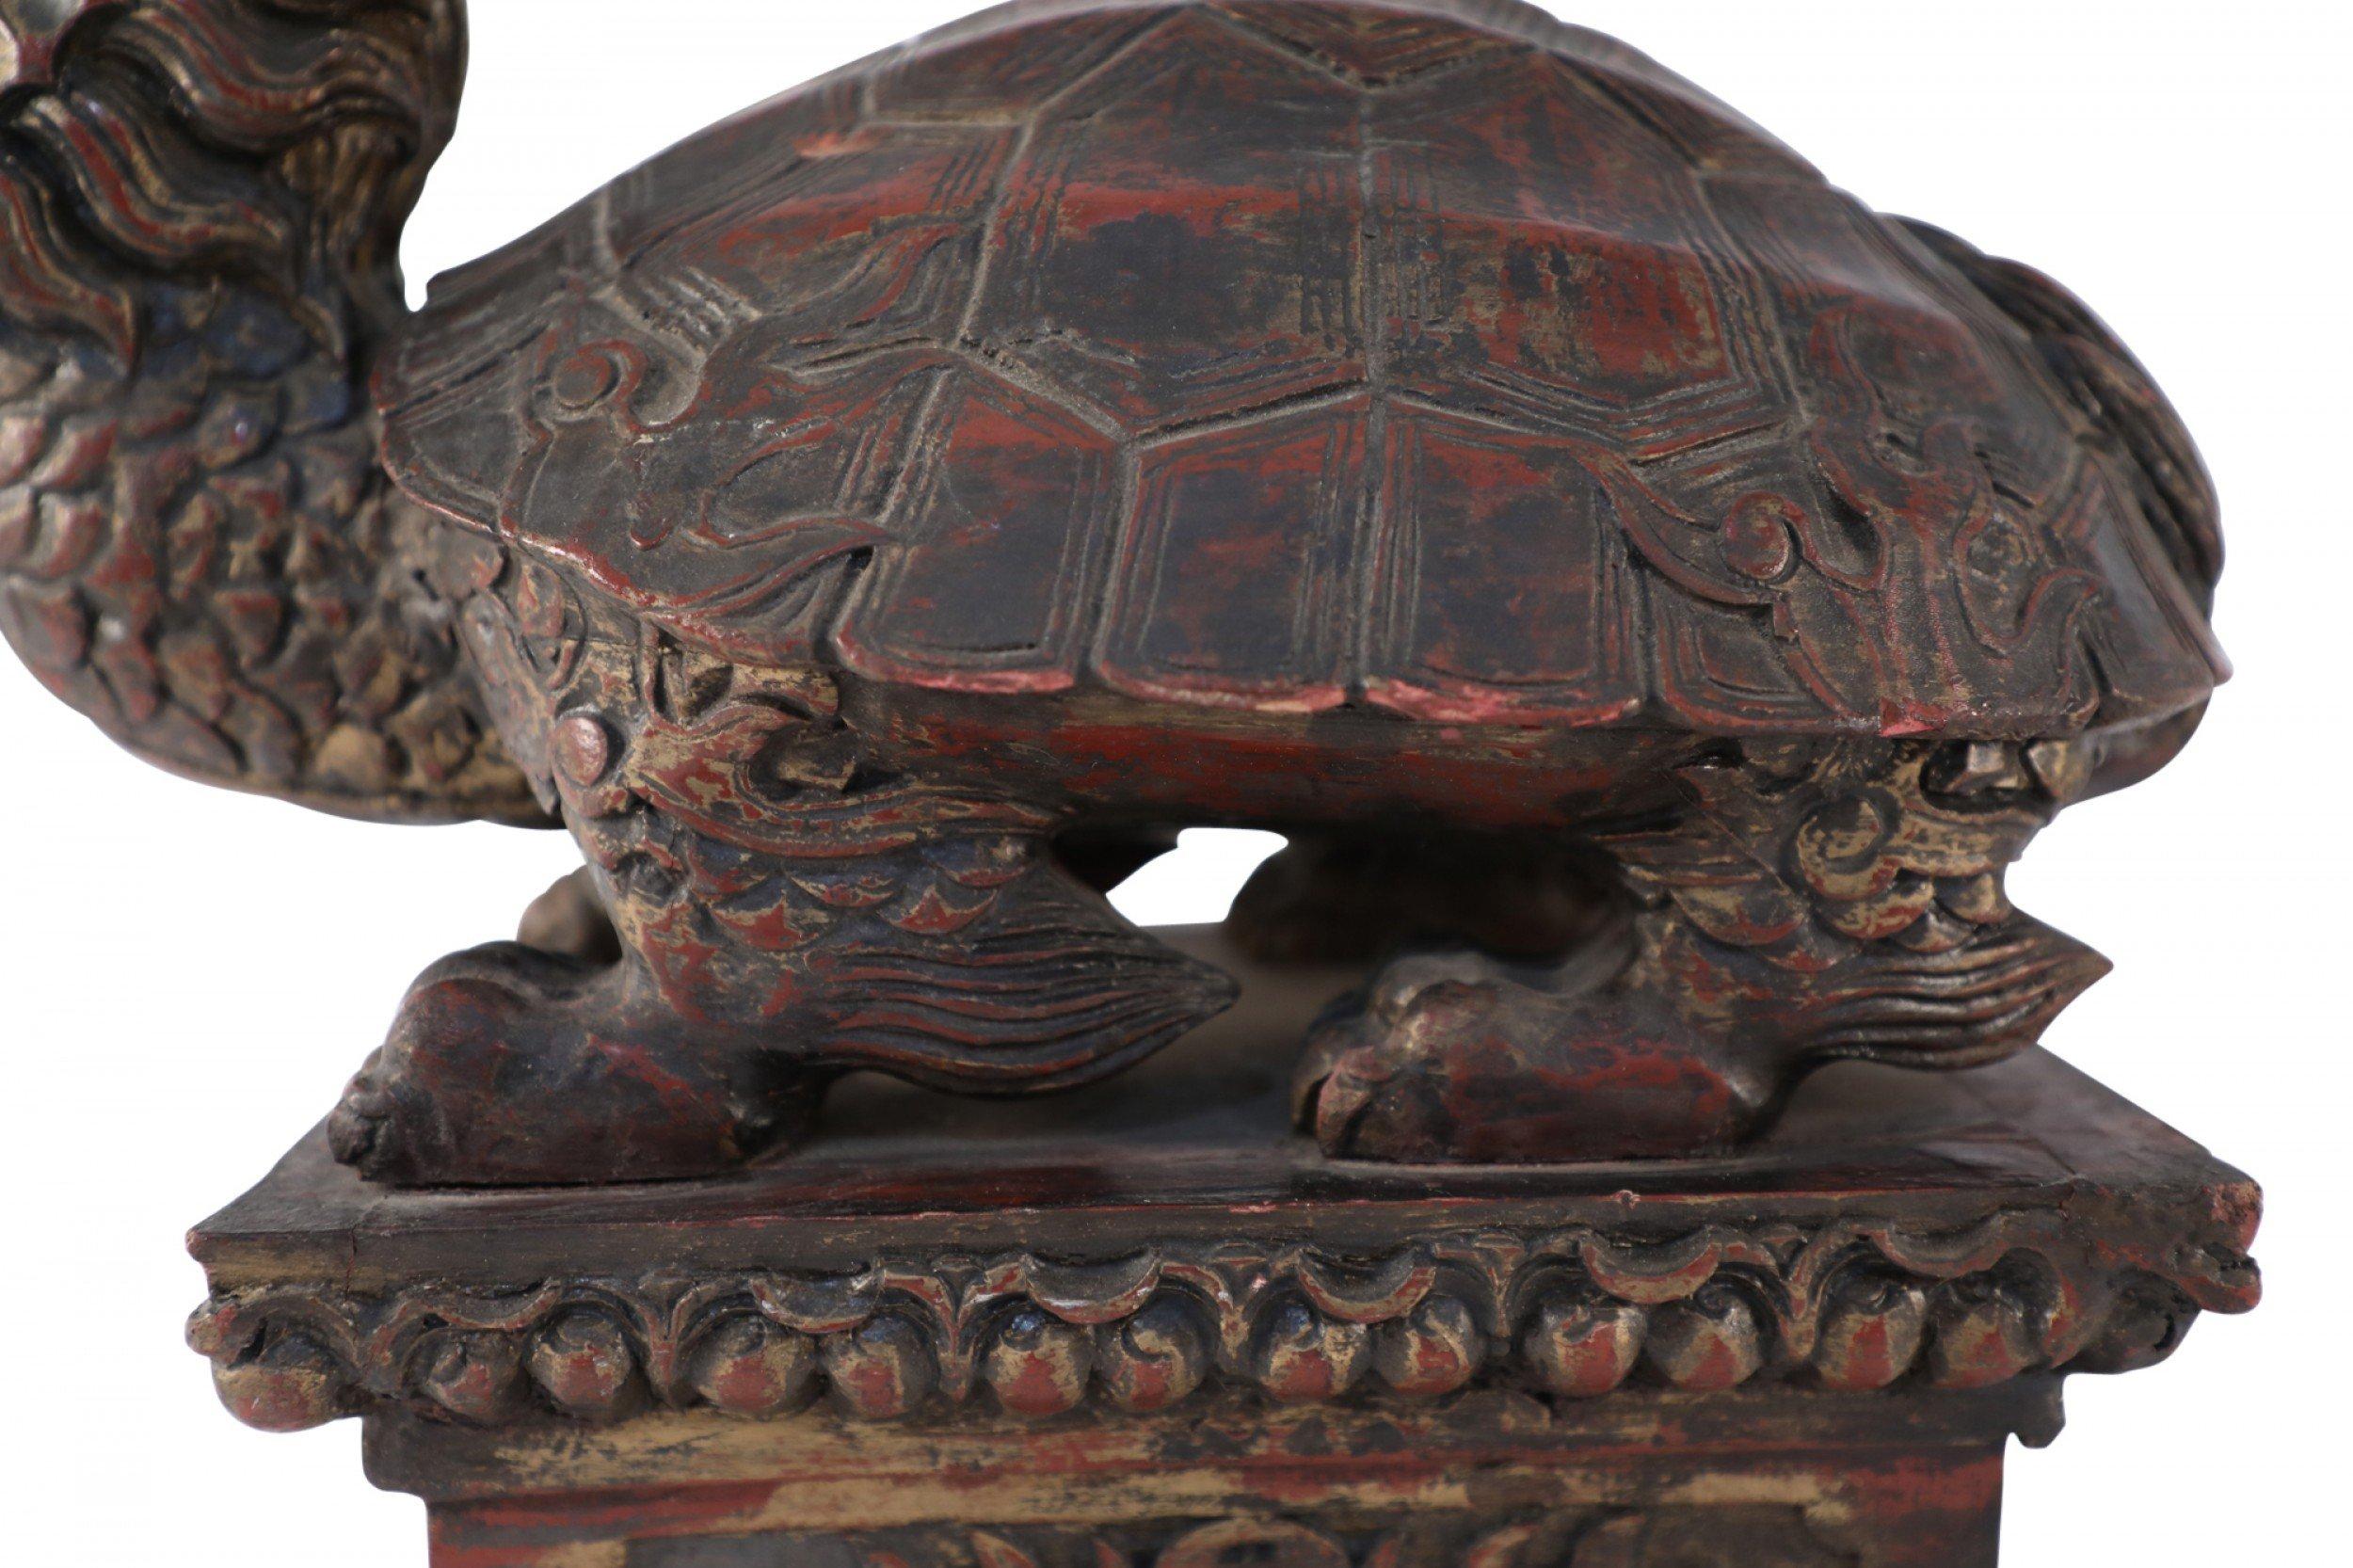 Antique Chinese Carved Wooden Longgui Dragon Turtle Sculpture In Good Condition For Sale In New York, NY